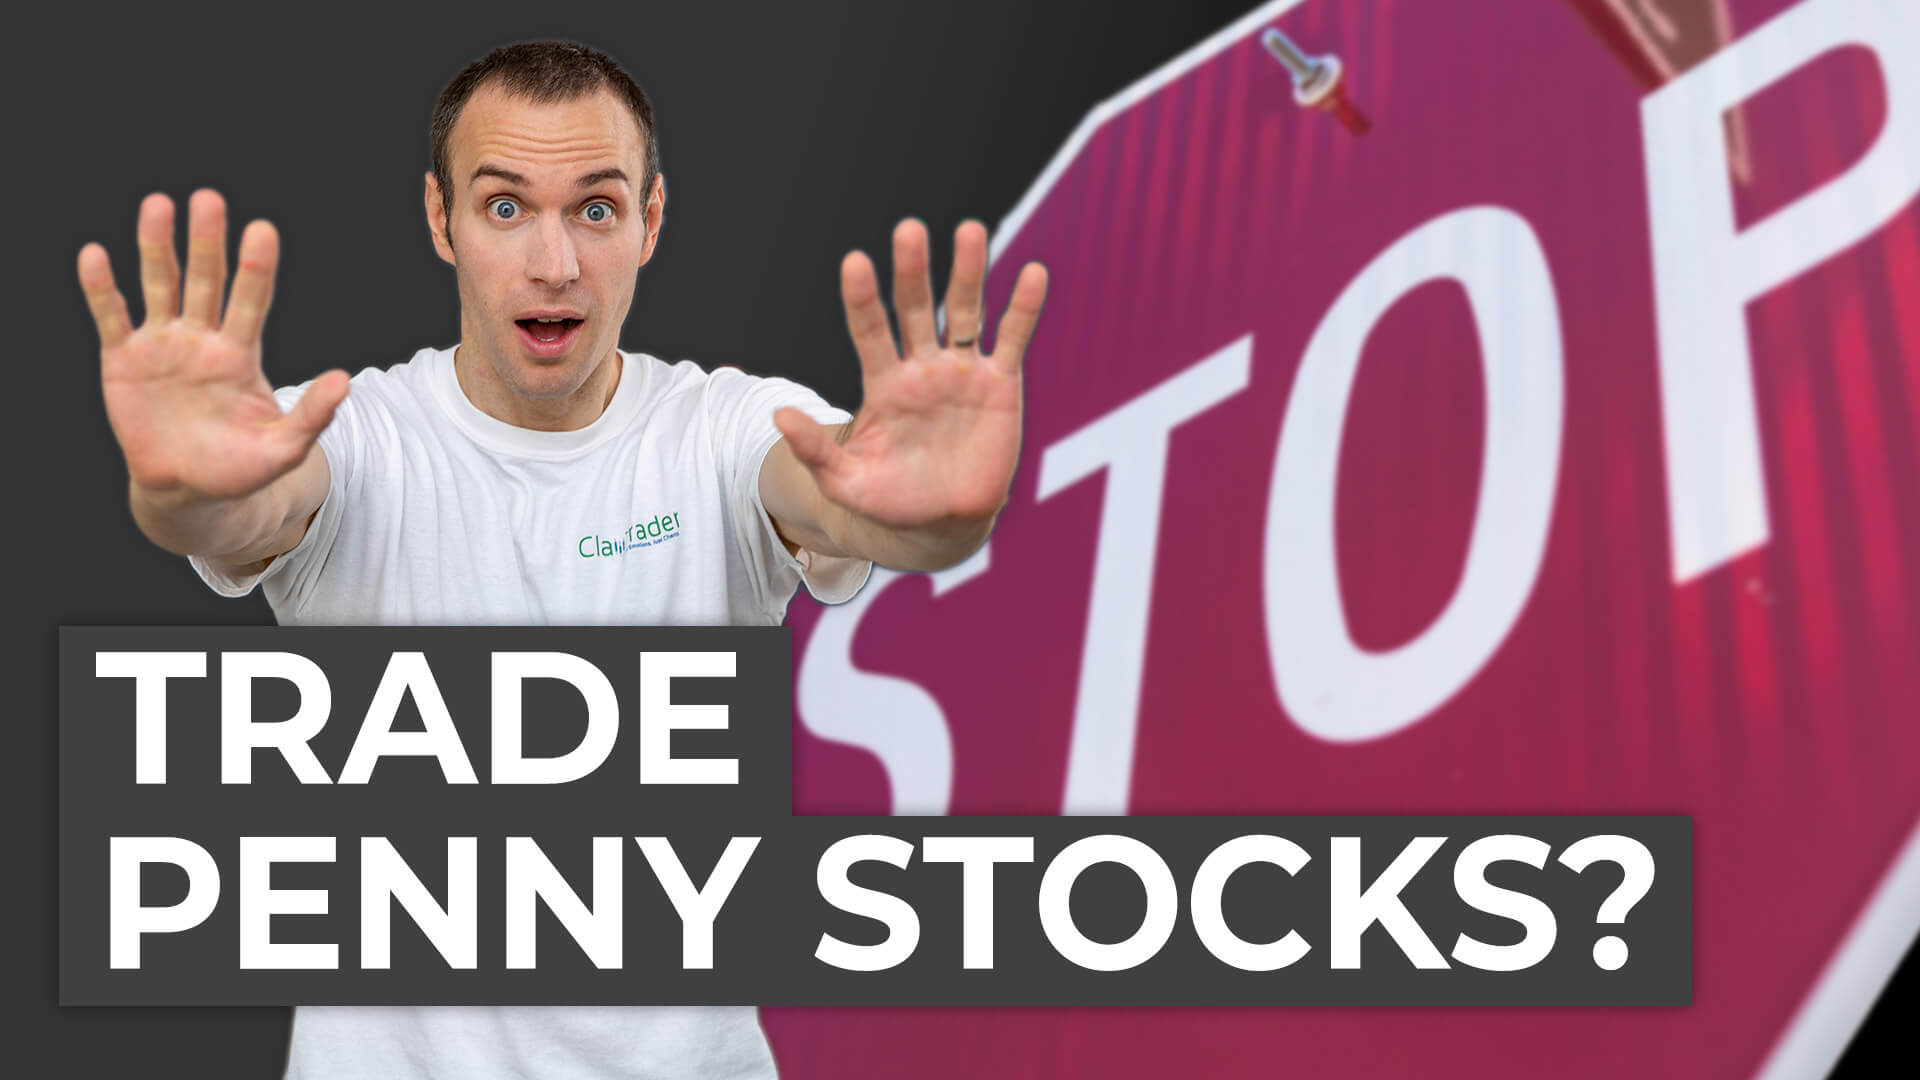 Should You Learn How to Trade Penny Stocks? No! (Here's Why...)